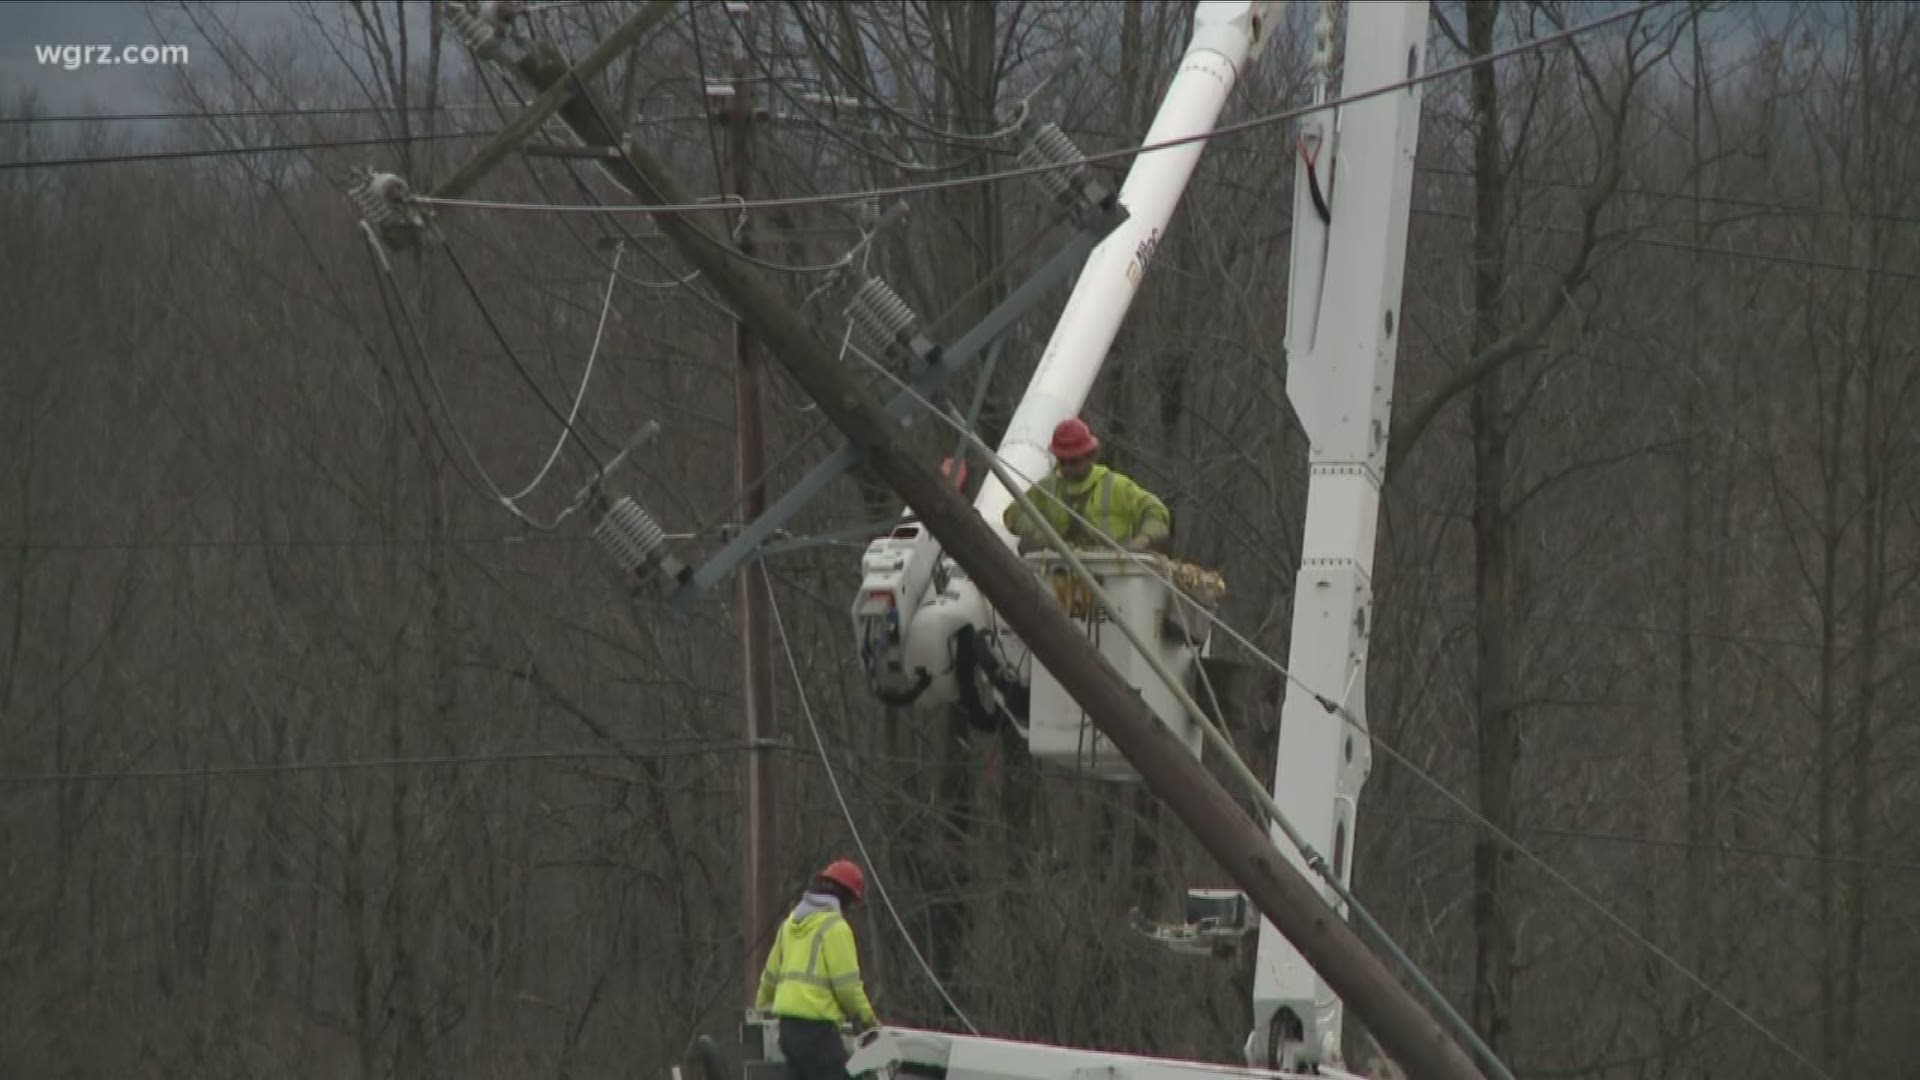 National Grid says it will have more than 2,000 workers on the clock trying to keep the power on across Western New York.   More workers can be called in from out-of-state if needed.  N.Y.S.E.G. says it will start staging equipment Saturday.  Verizon will also have crews out focusing on maintaining cell service.